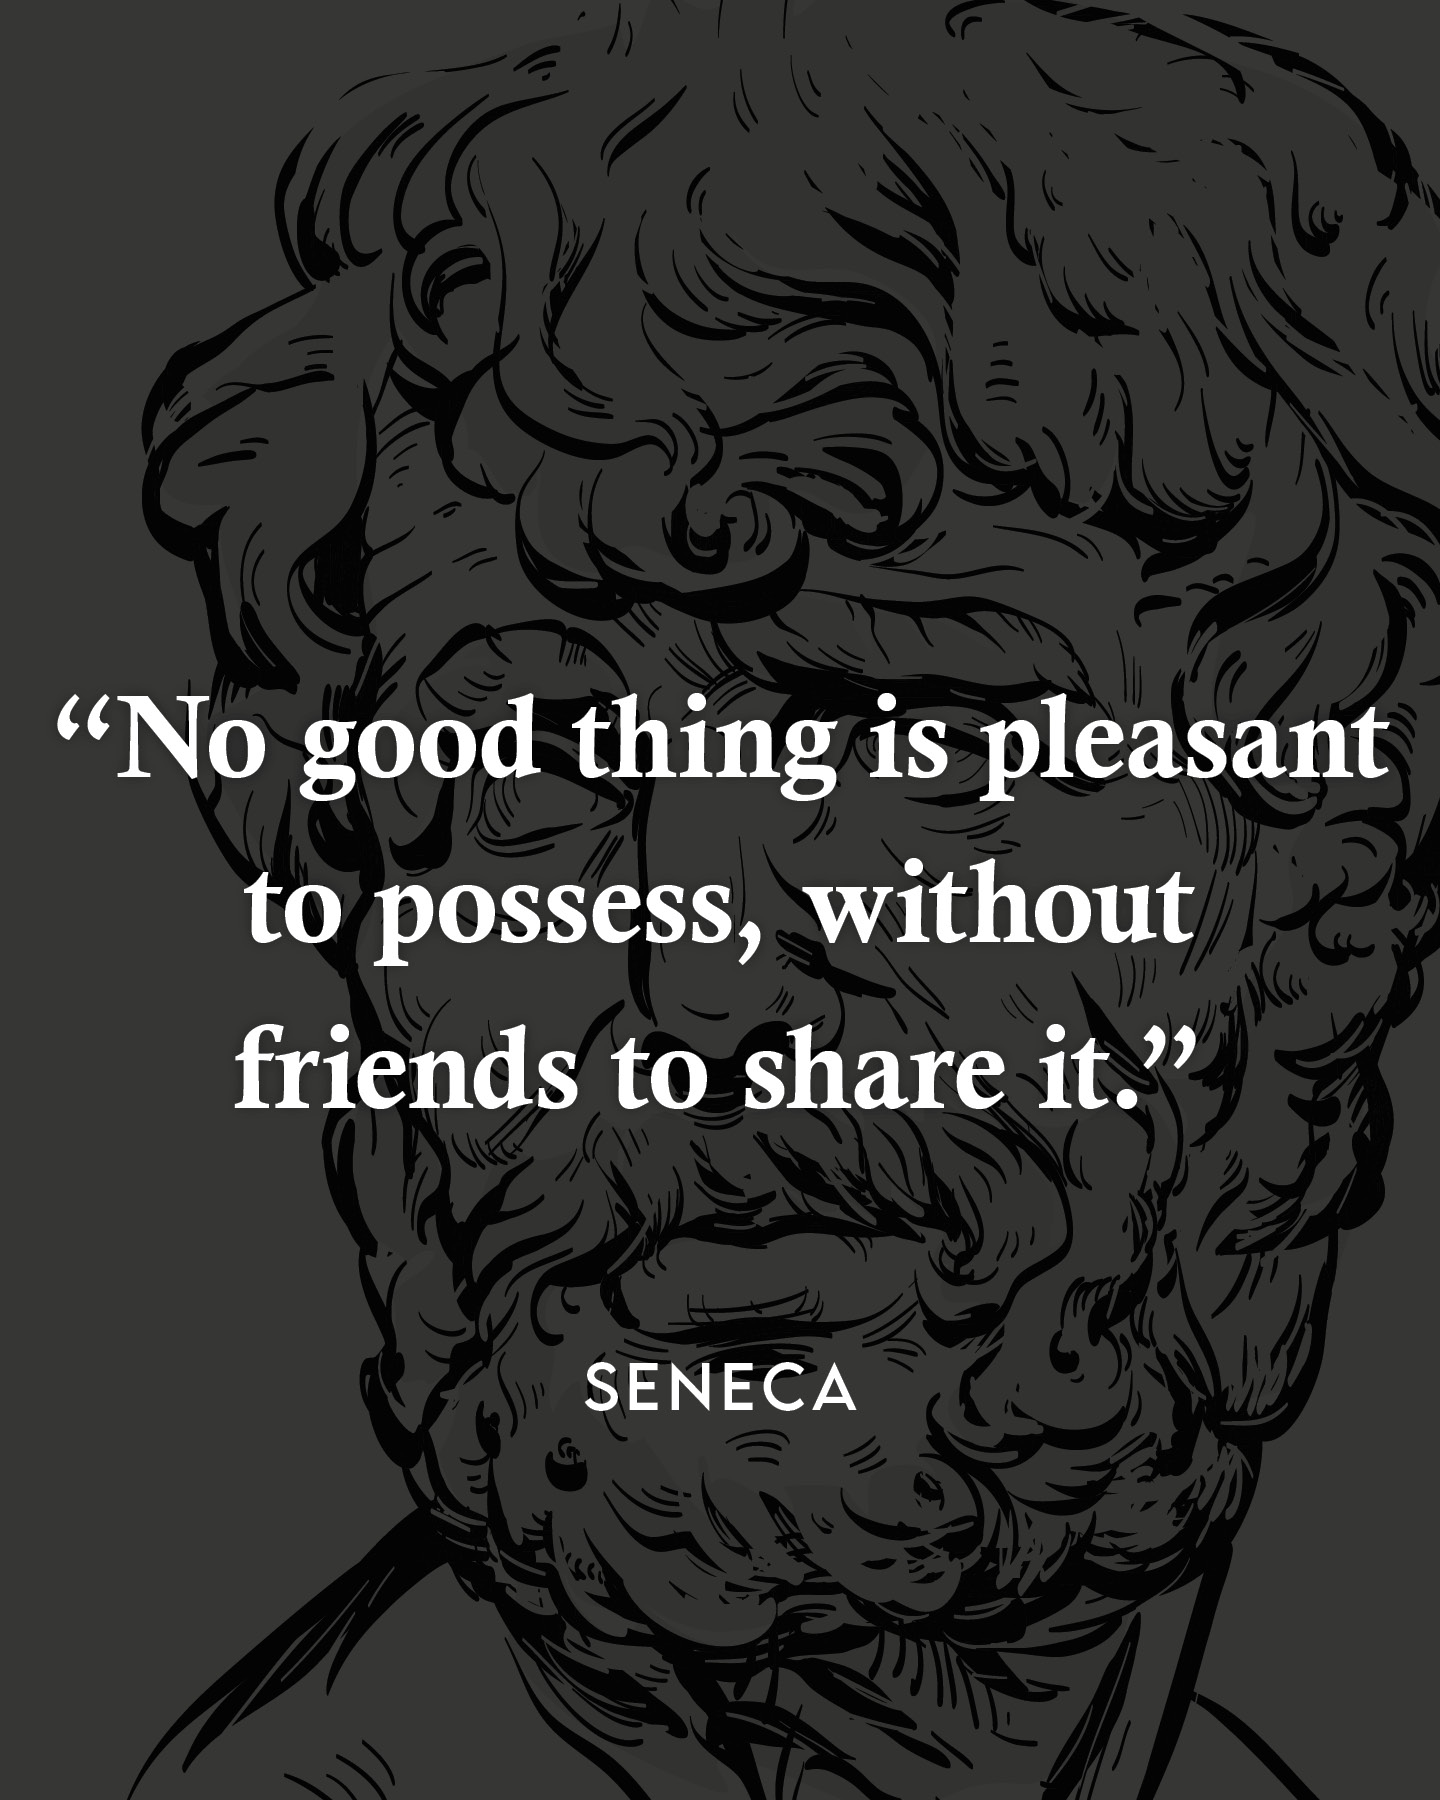 No good thing is pleasant to possess, without friends to share it.